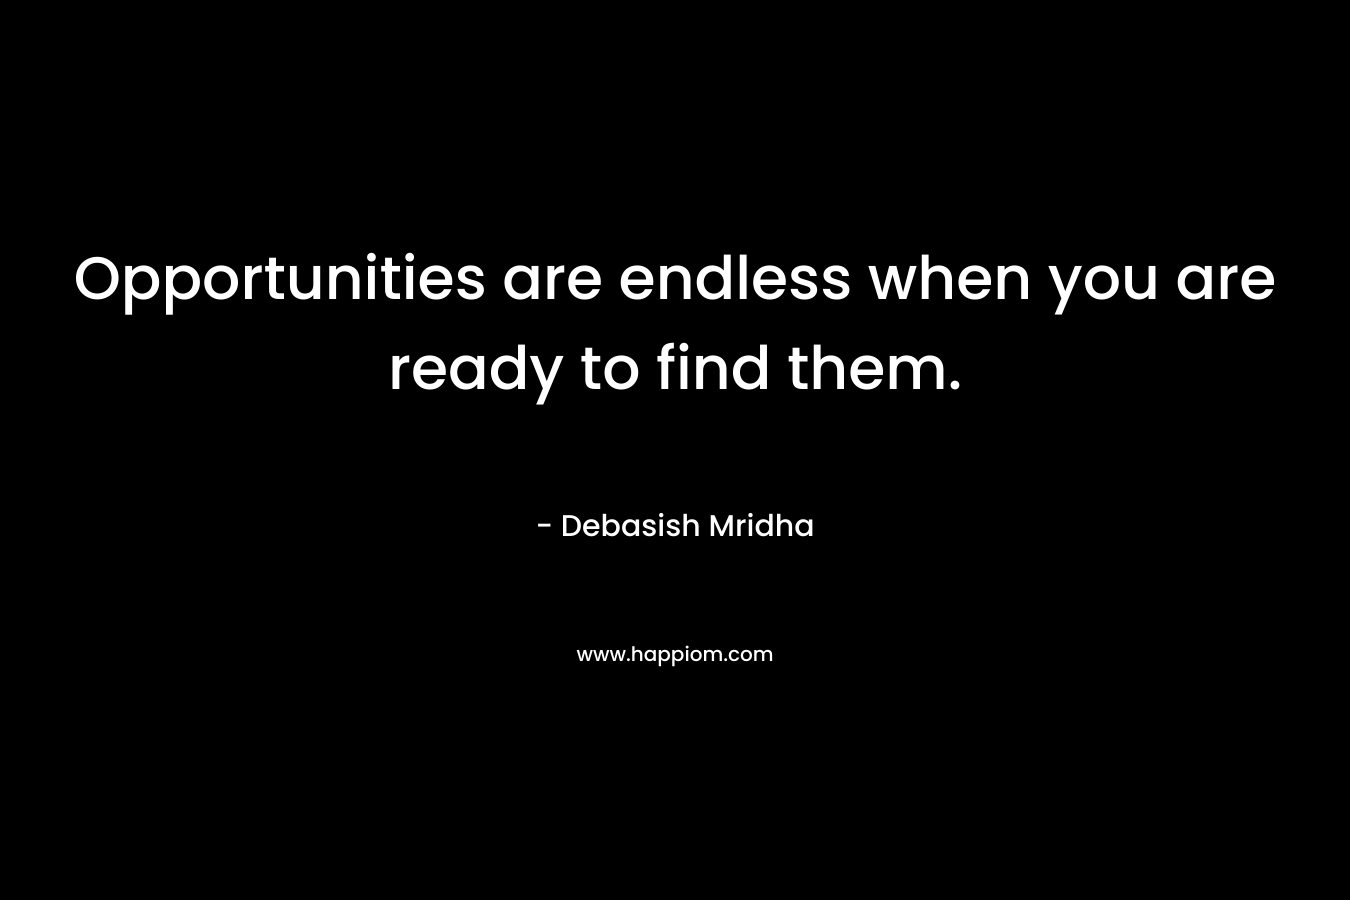 Opportunities are endless when you are ready to find them.